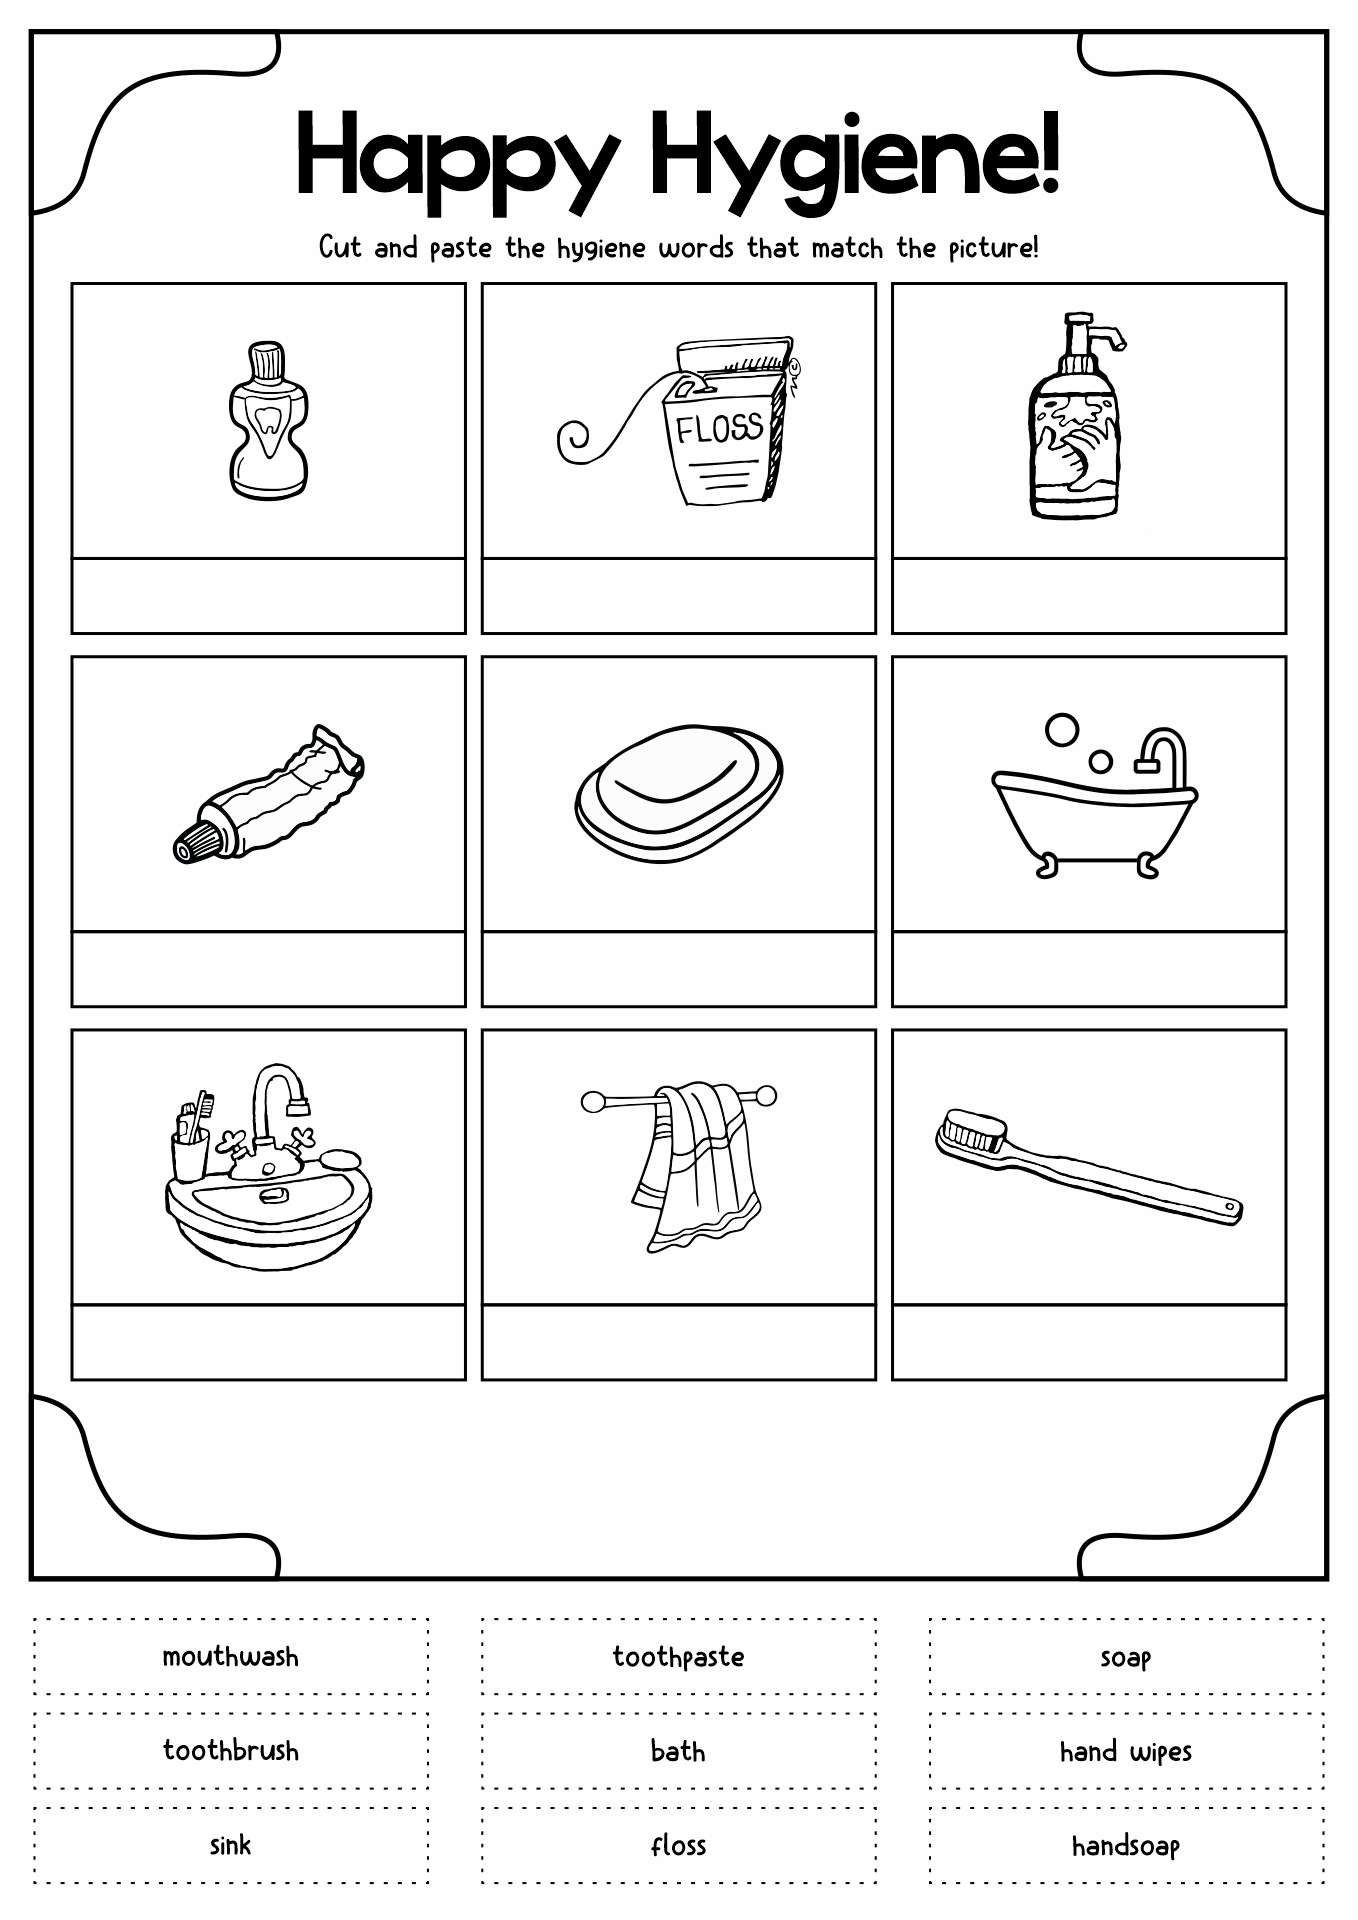 16 Best Images of Personal Safety Worksheets - Personal Hygiene ...